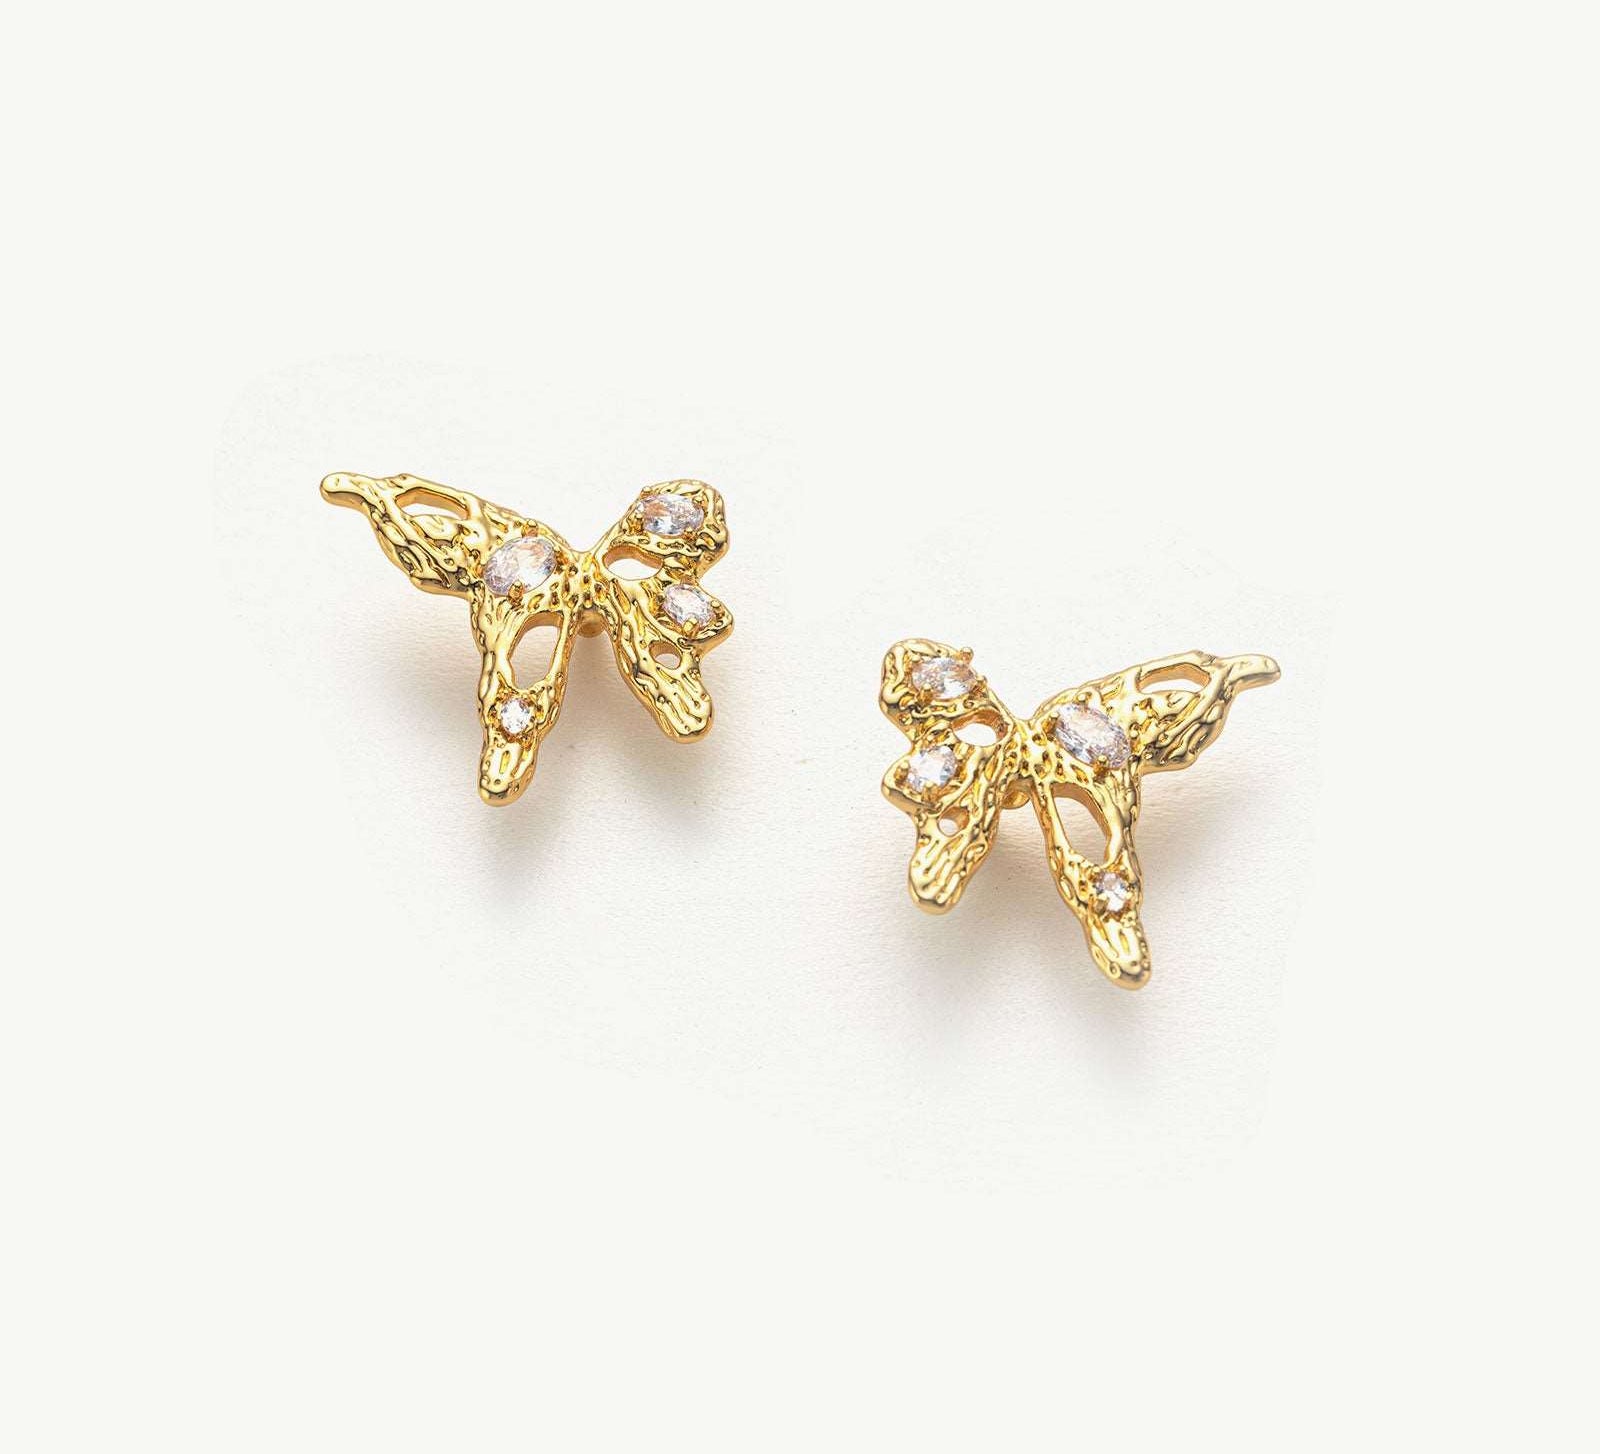 Crystal Stud Earrings with Butterfly Design, a whimsical and sparkling accessory that adds a touch of enchantment to your ears.